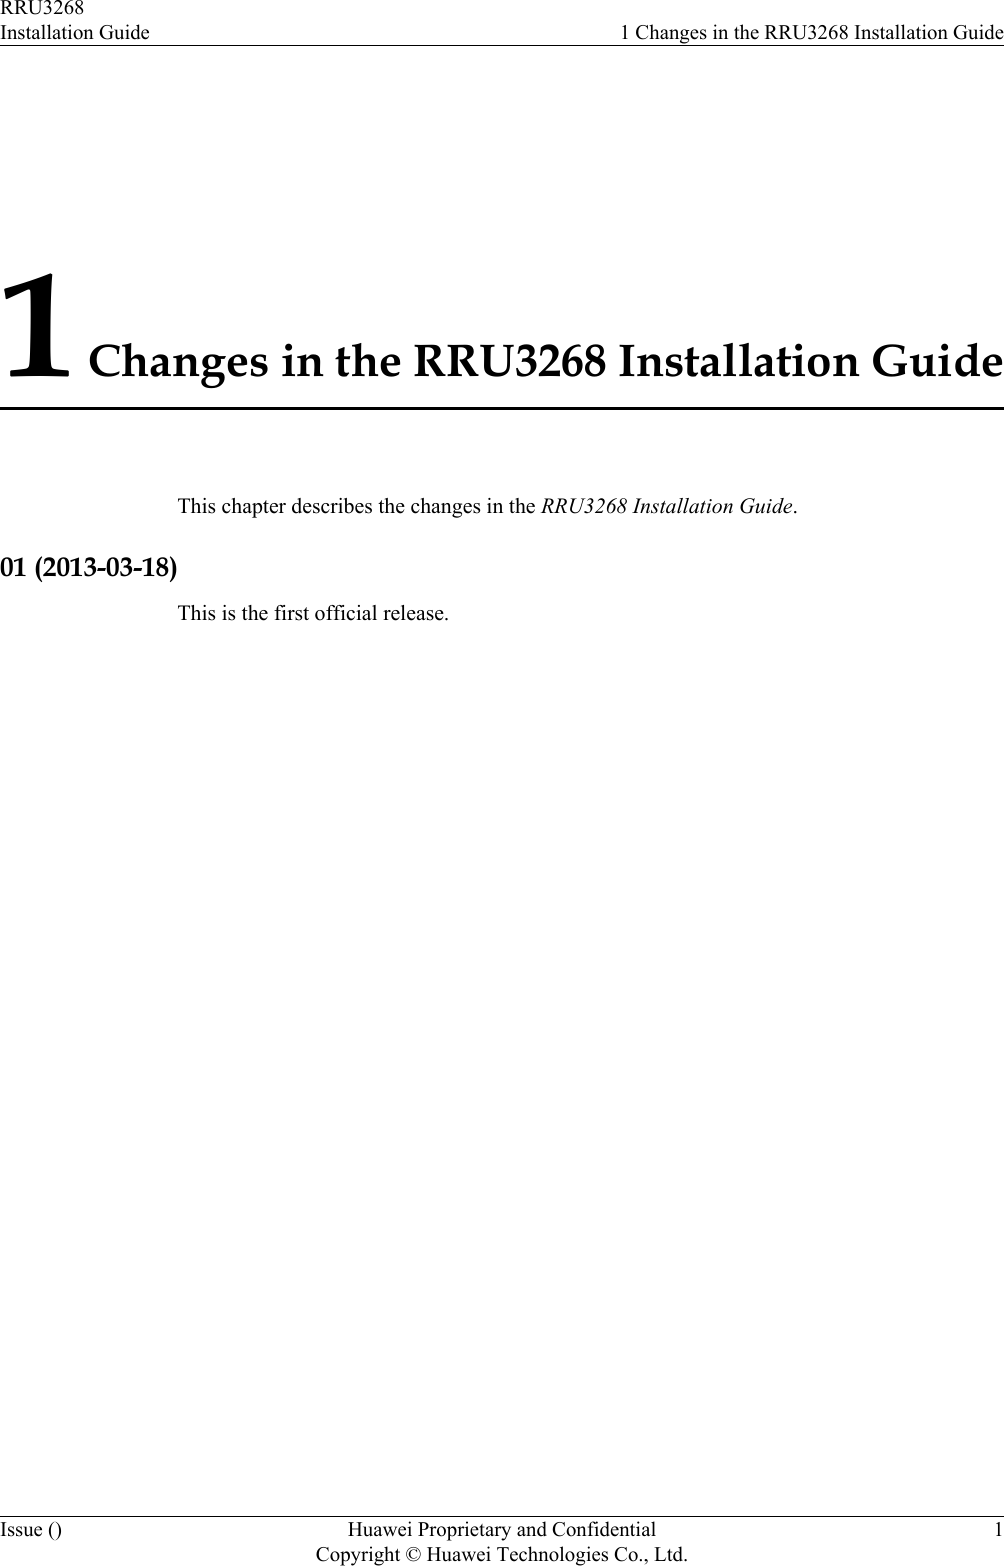 1 Changes in the RRU3268 Installation GuideThis chapter describes the changes in the RRU3268 Installation Guide.01 (2013-03-18)This is the first official release.RRU3268Installation Guide 1 Changes in the RRU3268 Installation GuideIssue () Huawei Proprietary and ConfidentialCopyright © Huawei Technologies Co., Ltd.1